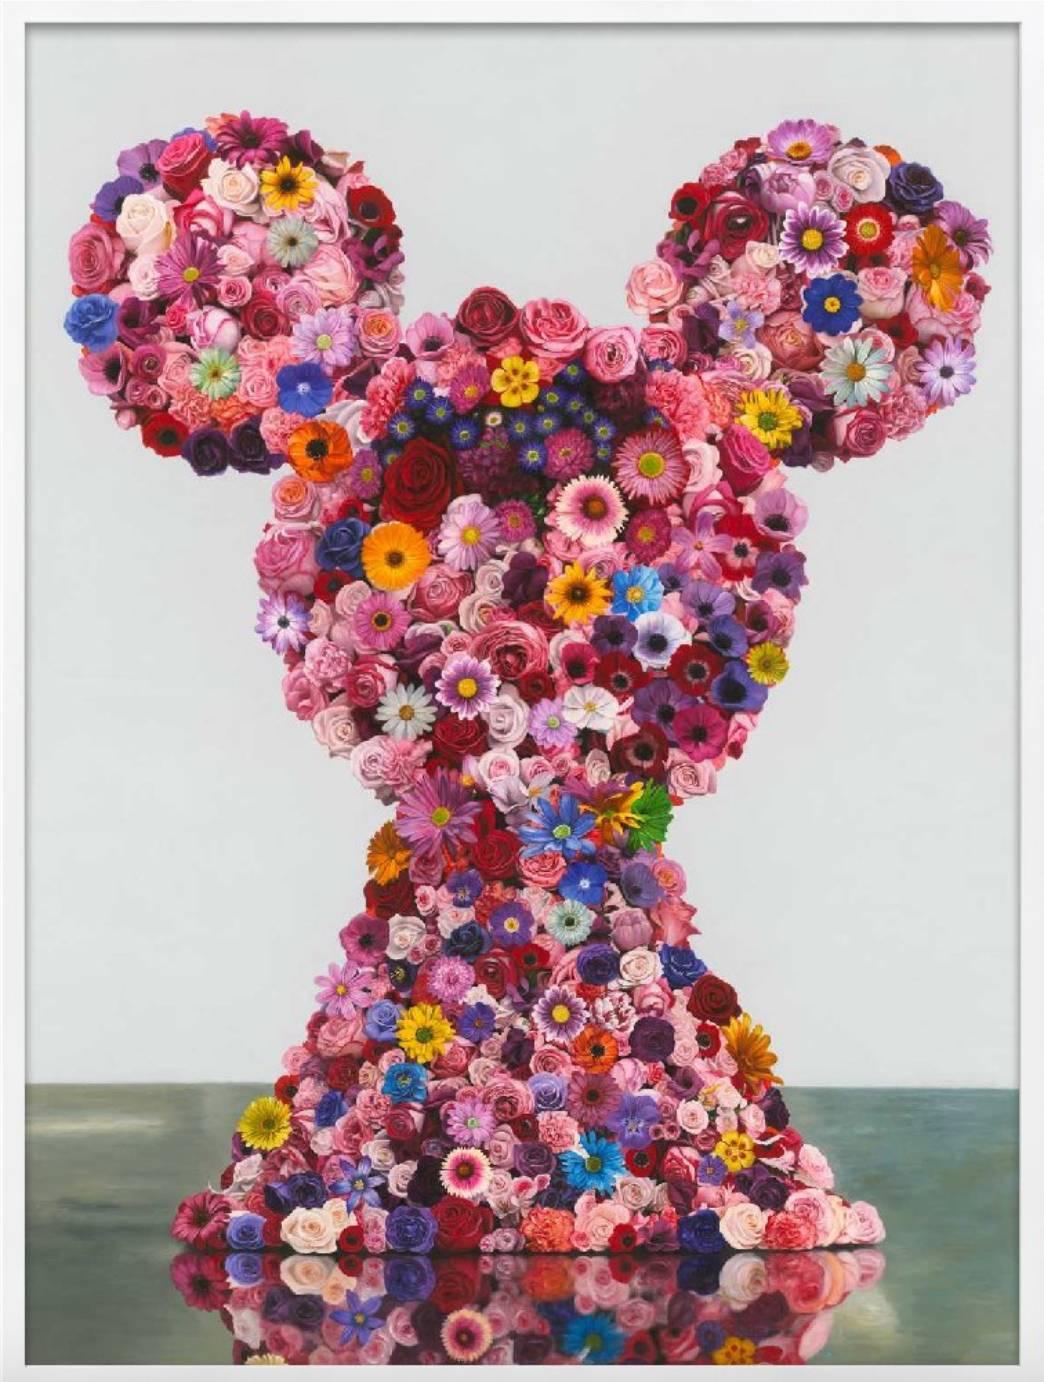 This vibrant piece depicts a hypothetical, larger-than-life sculpture made of flowers in the shape of Mickey Mouse. Like this famous silhouette, Marc's work satirizes pop-culture and art history, playfully nodding at the spectacle of contemporary